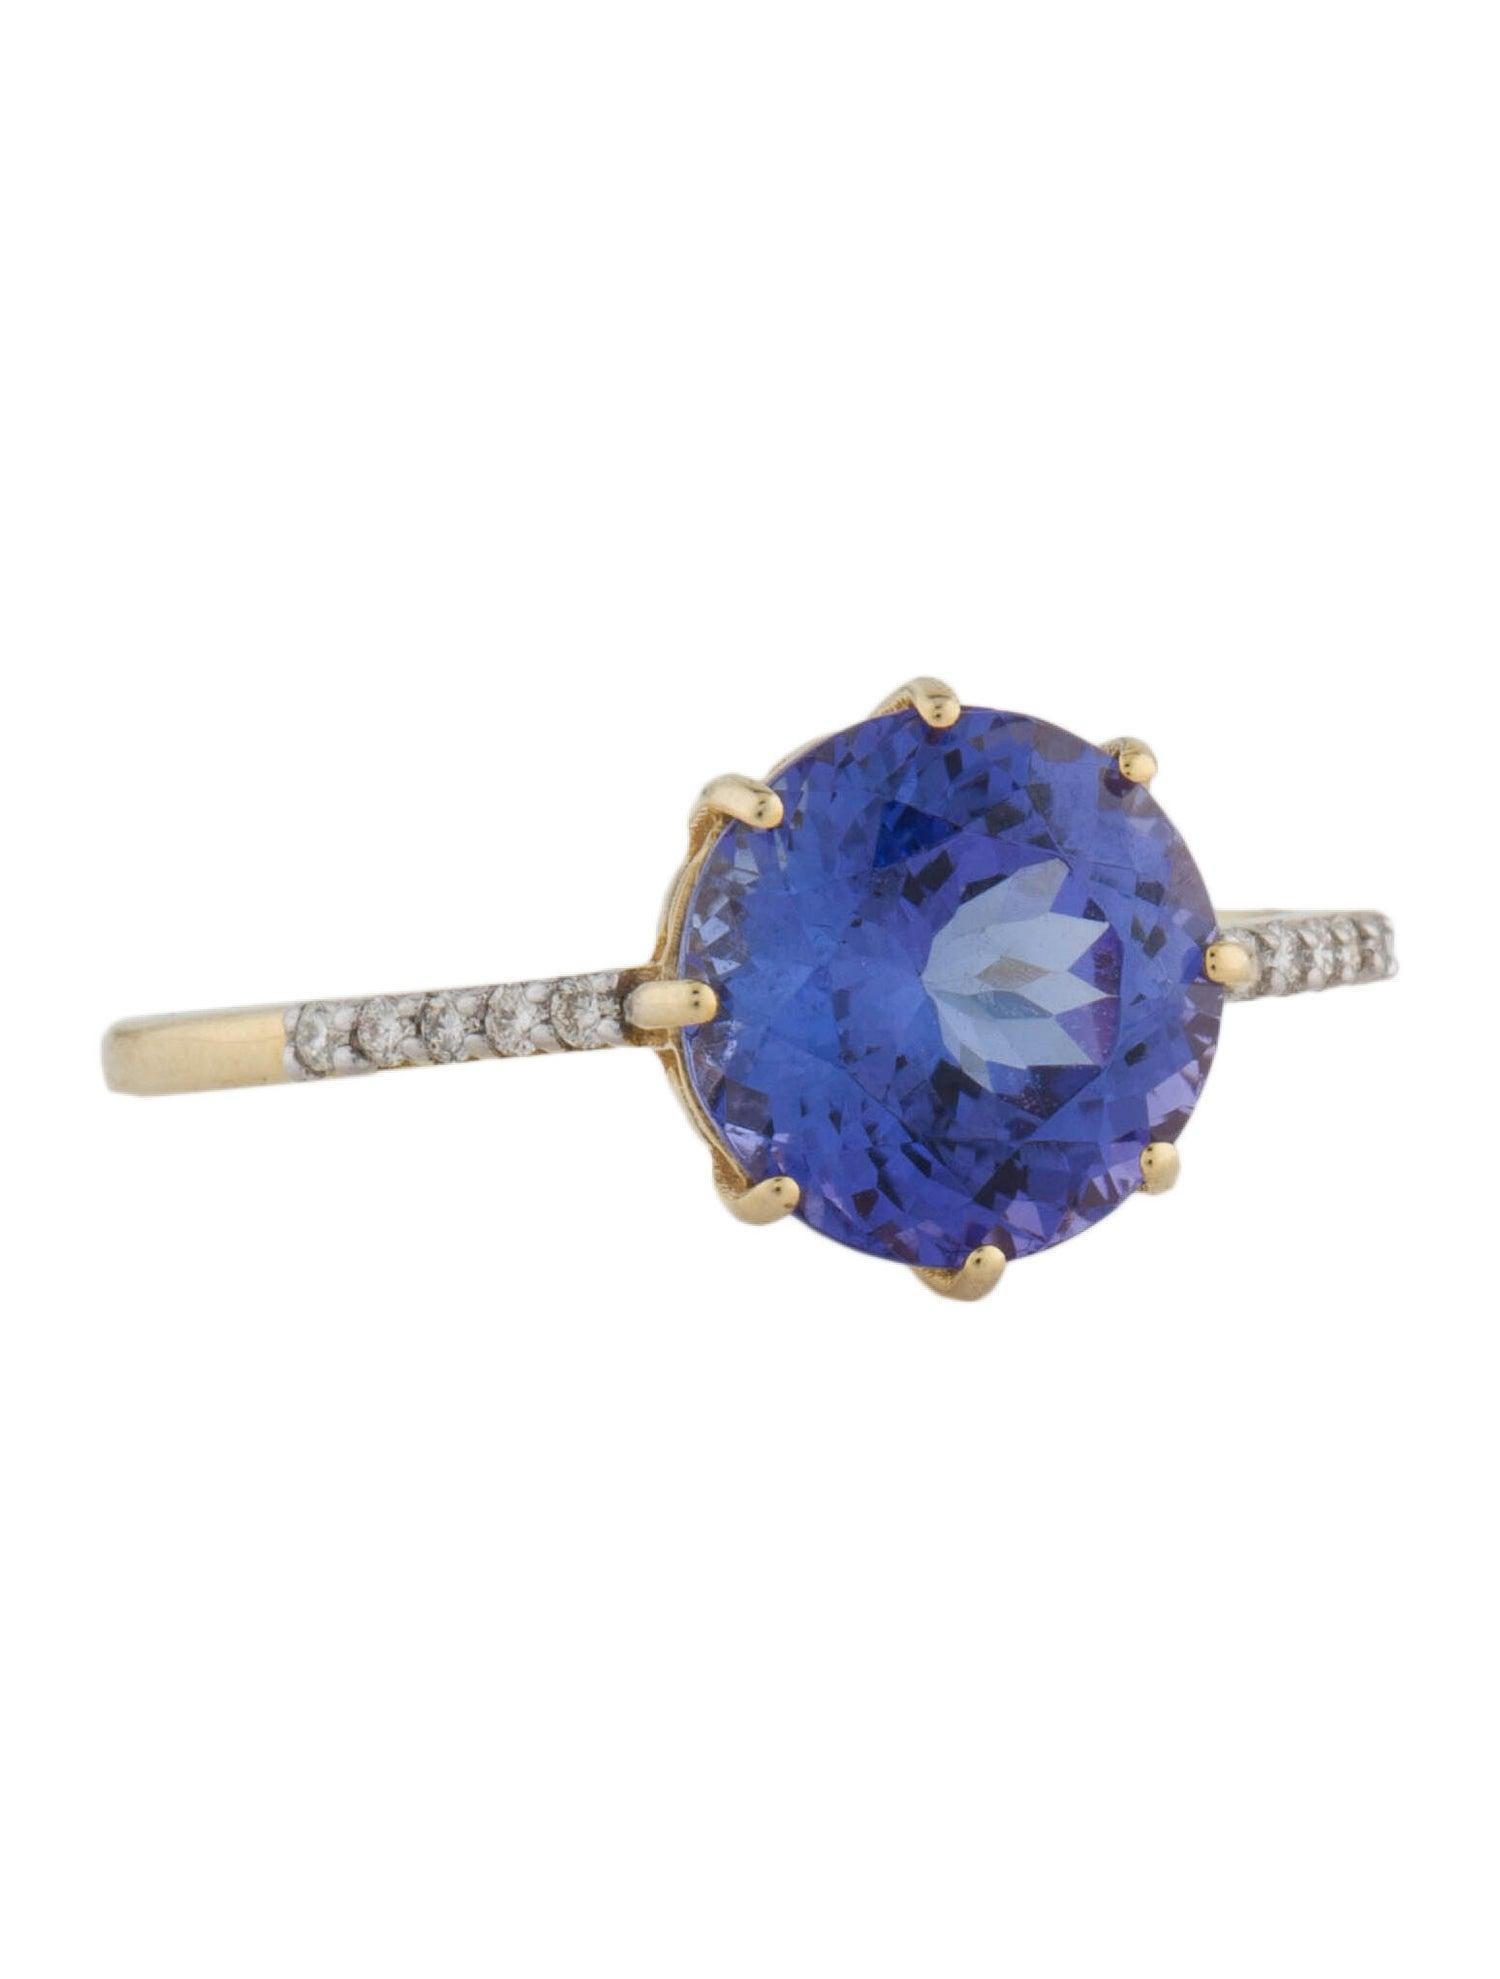 Introducing The Beauty of the Night Sky, a collection that transcends the ordinary and captures the essence of the exquisite night sky. Immerse yourself in the celestial beauty of stars with this premium Tanzanite and Diamond Ring from Jeweltique.